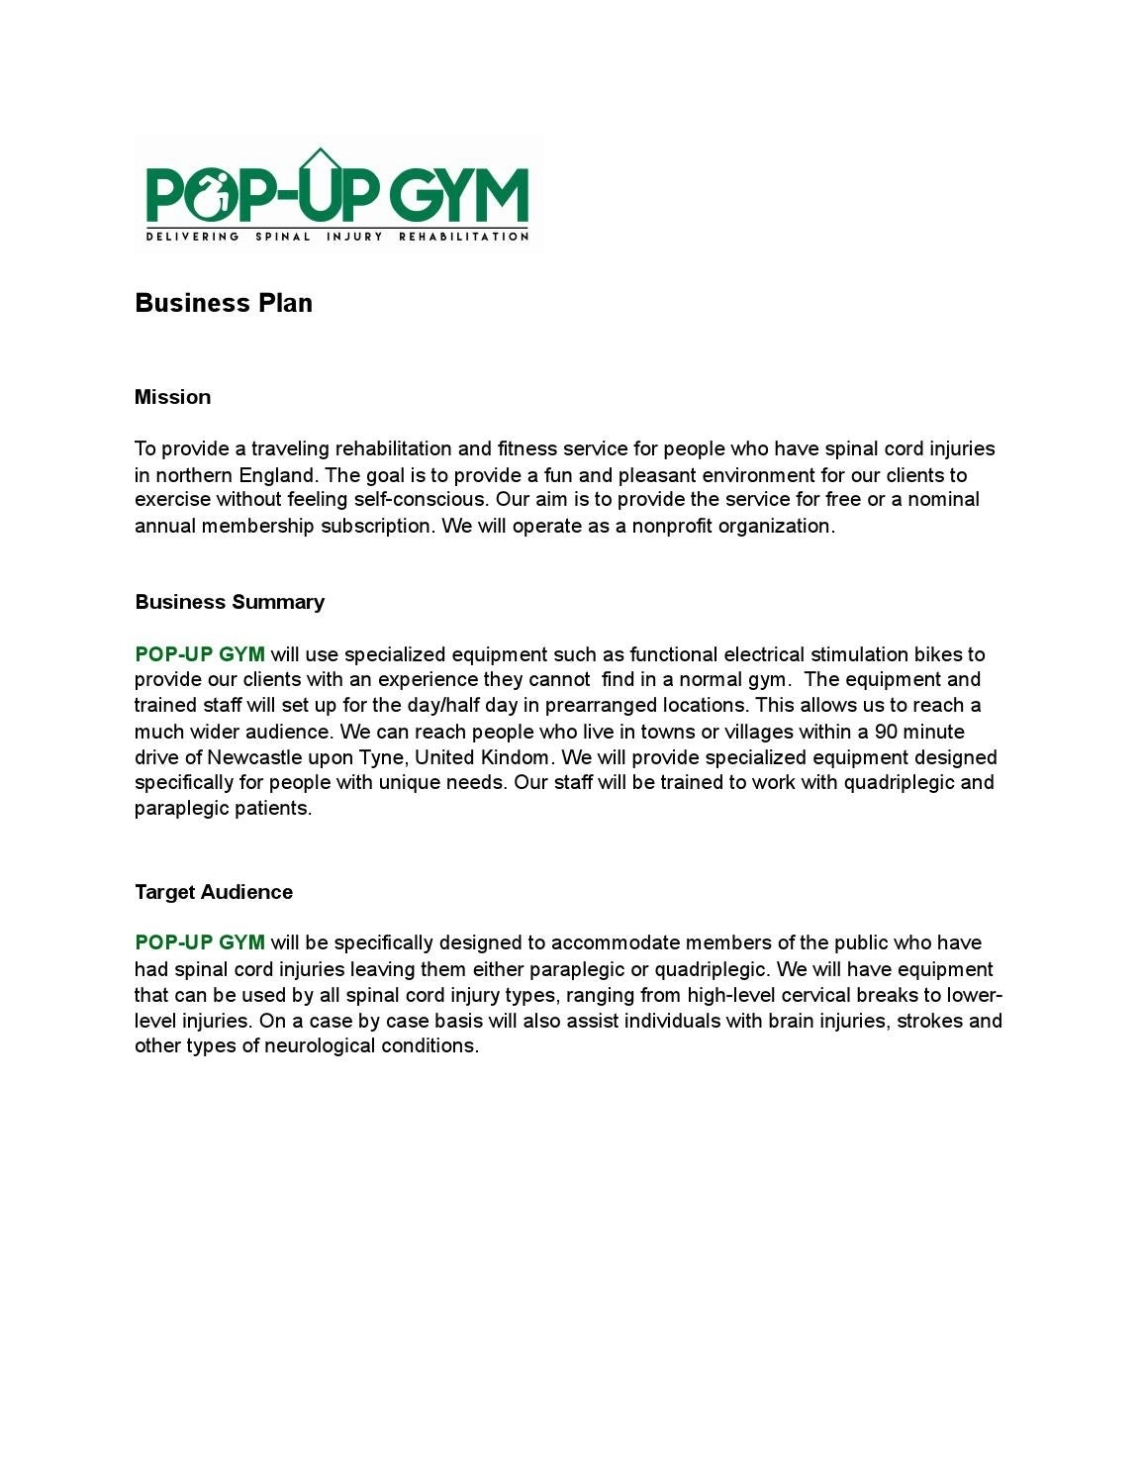 Pdf Pop Up Gym Business Plan By Scott Sayler – Issuu Pertaining To Business Plan Template For Gym